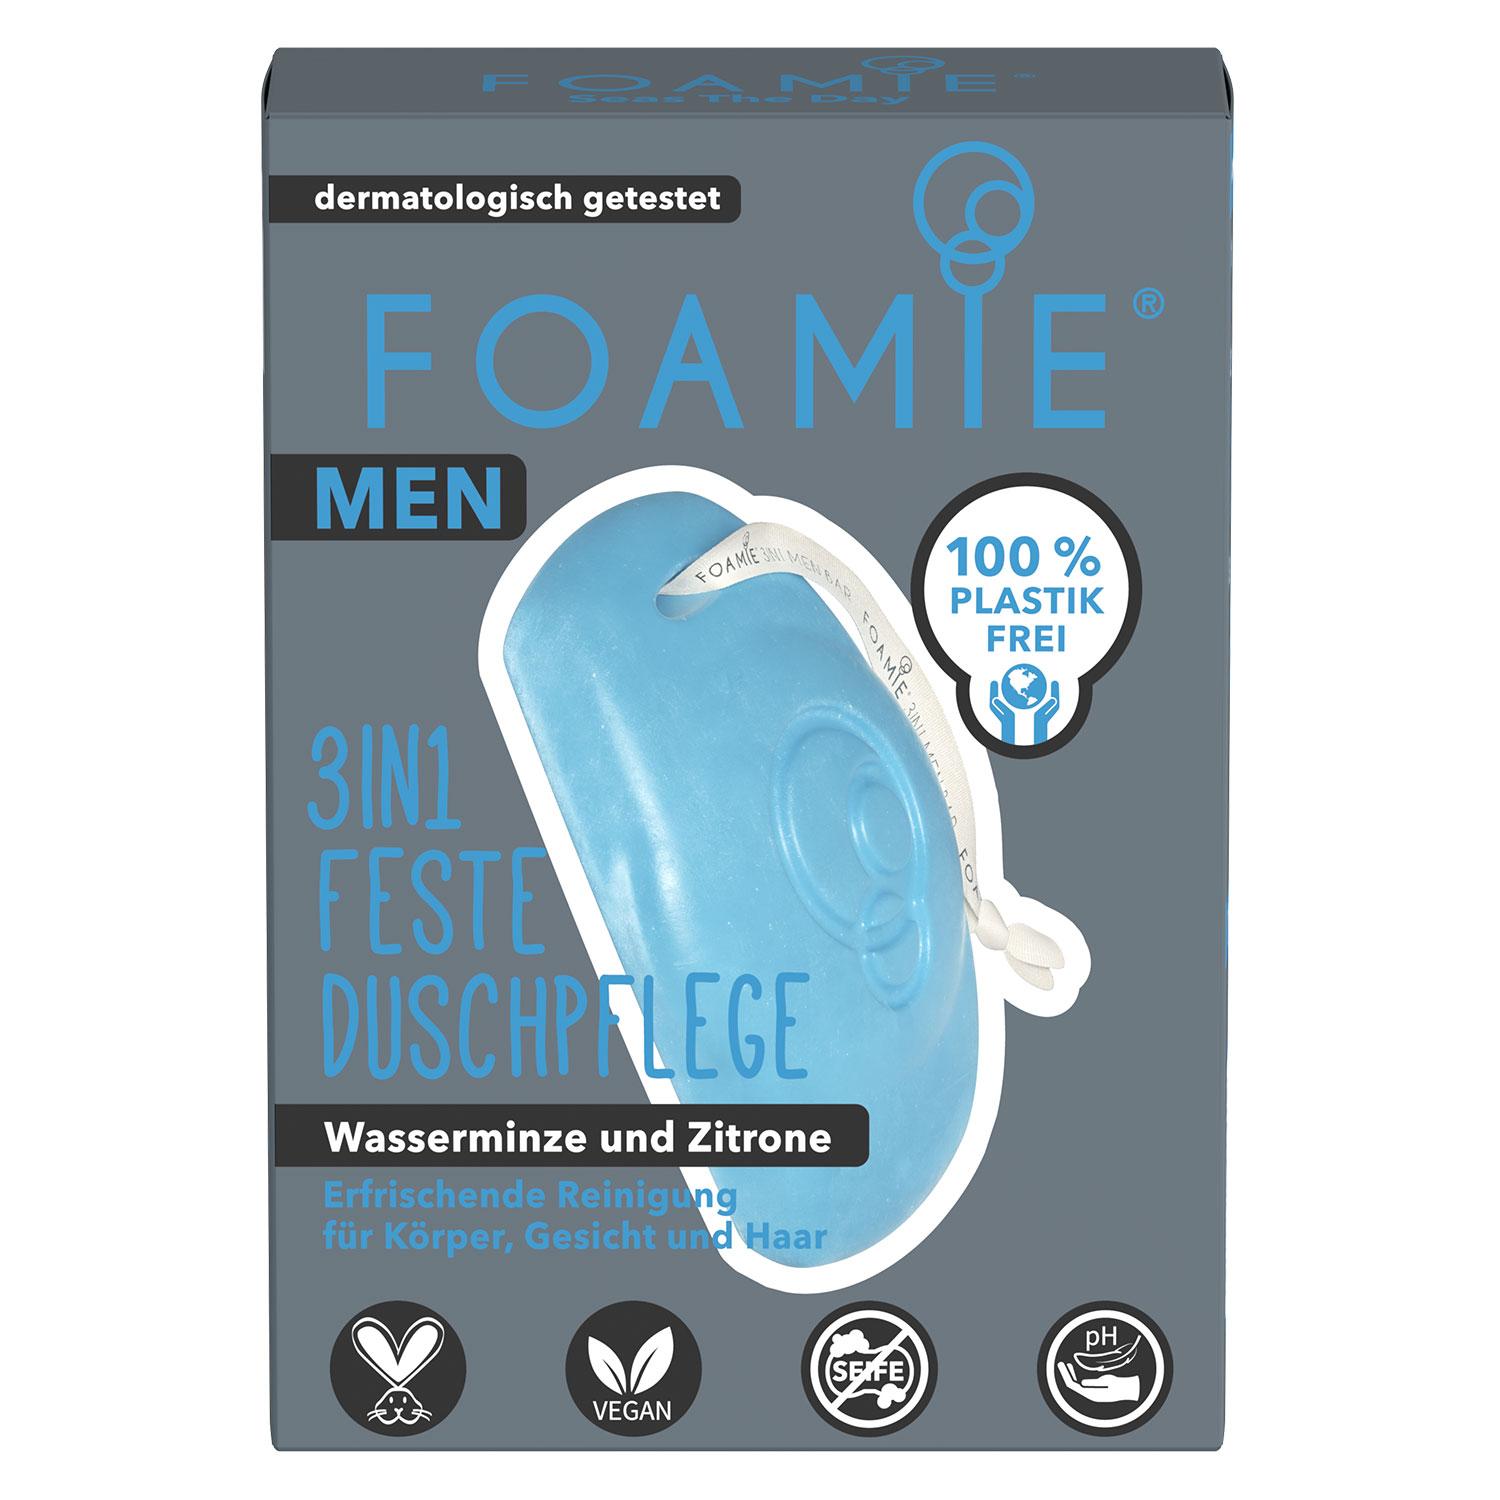 Foamie - Men 3in1 Solid shower care Seas the Day